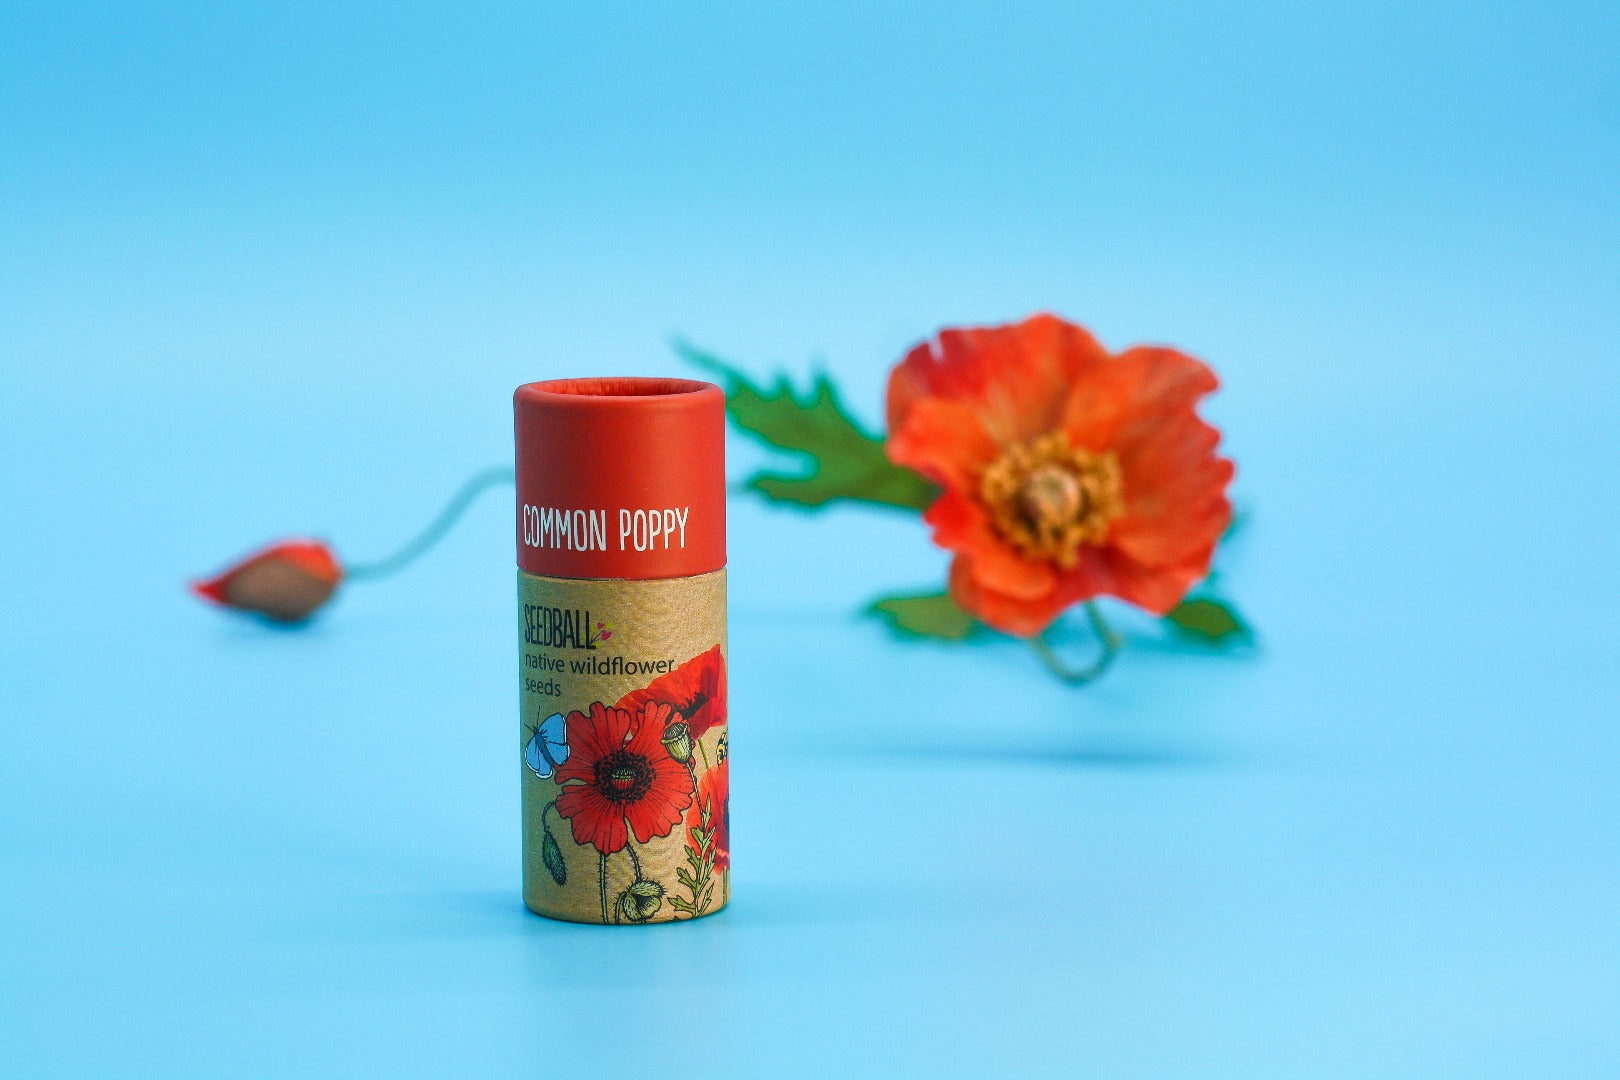 Tube of common poppy seedballs with a common poppy in the background